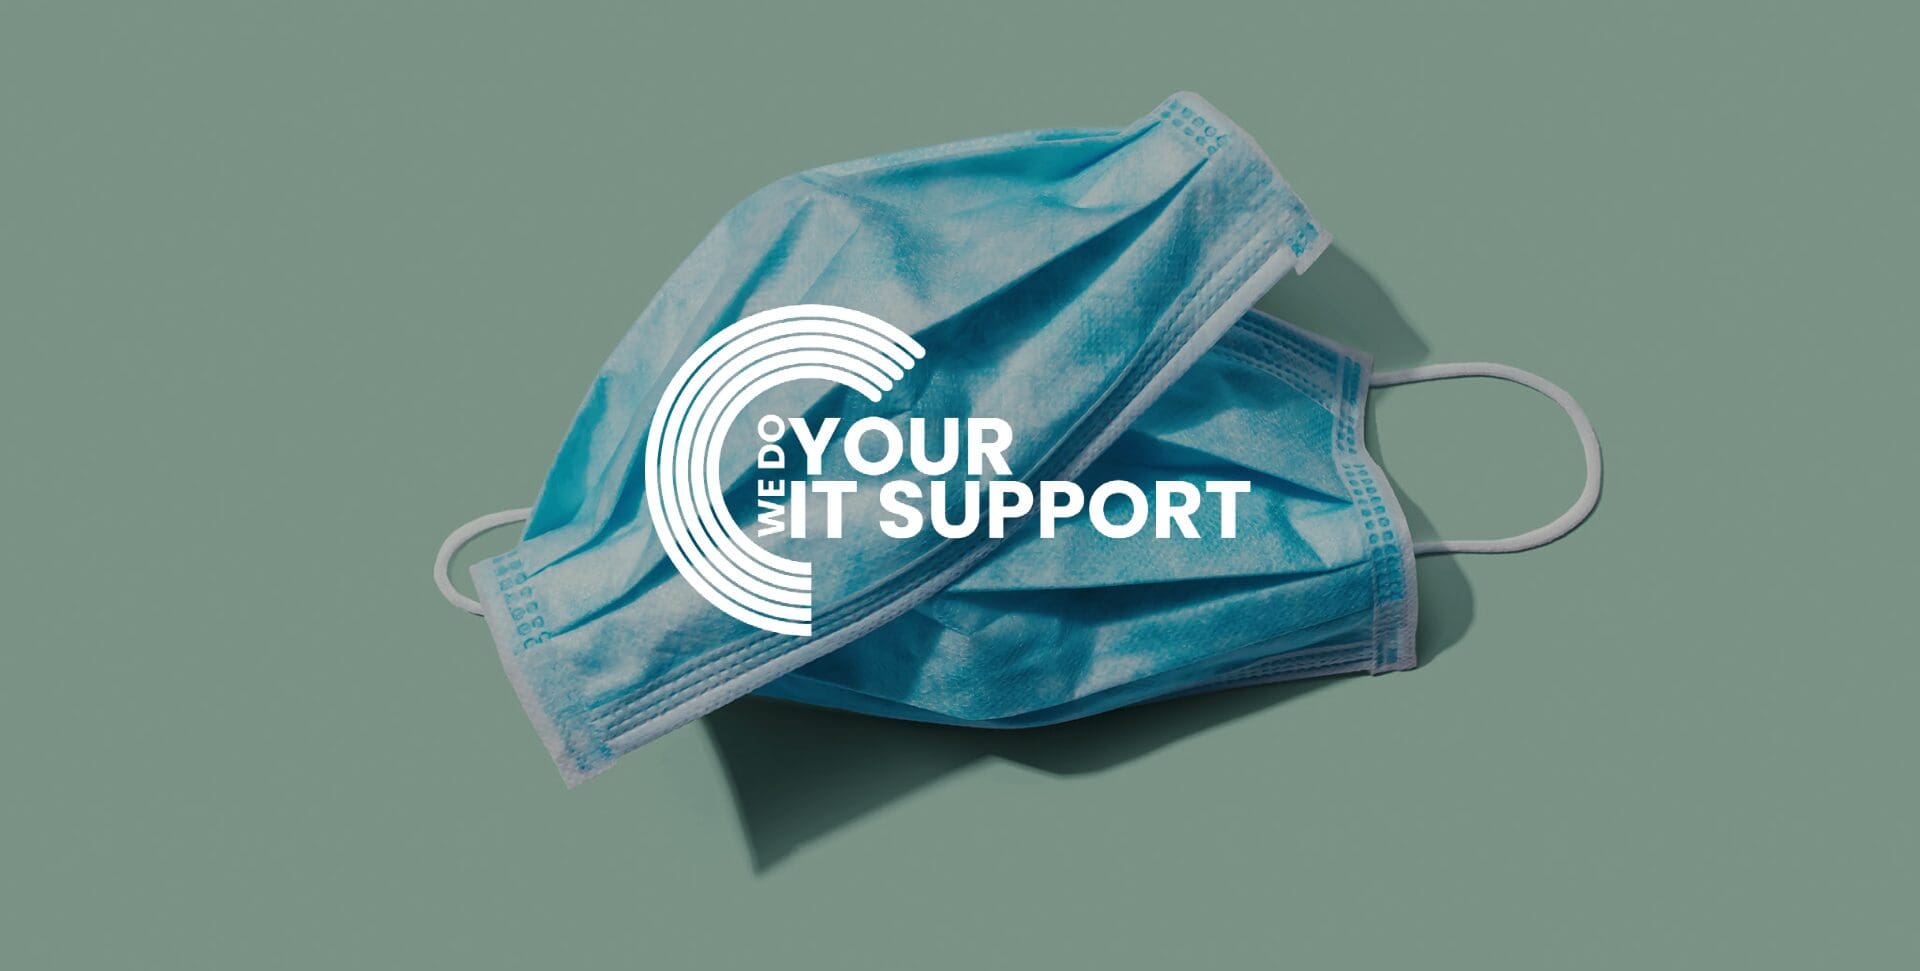 WeDoYourITSupport white logo on background of two face masks placed on light green background